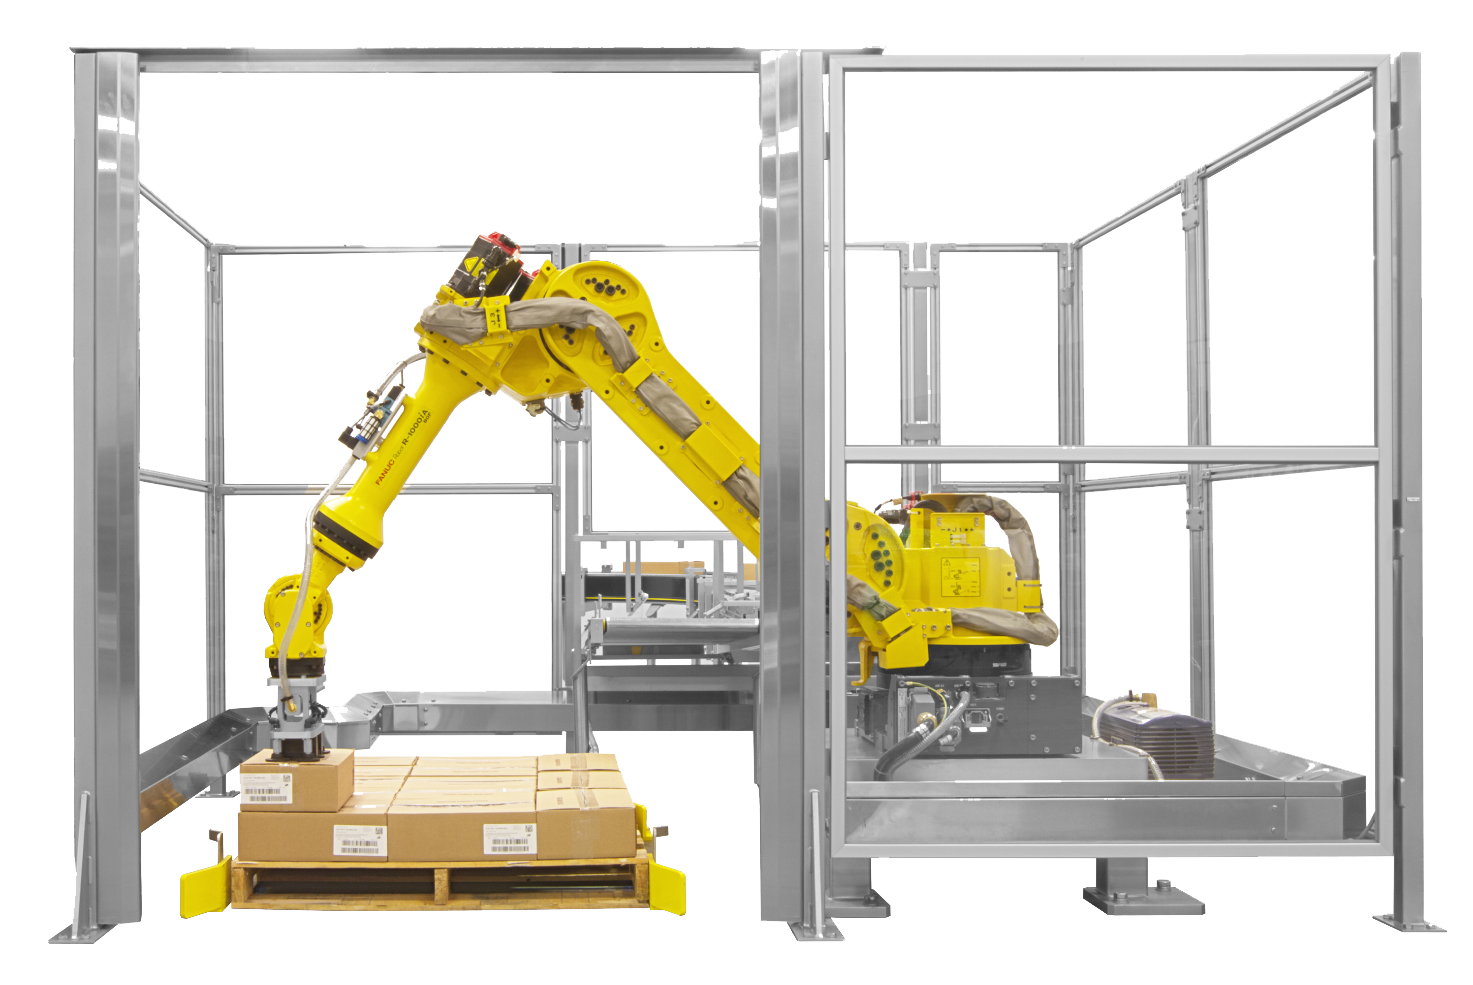 A yellow robot is palletizing boxes.